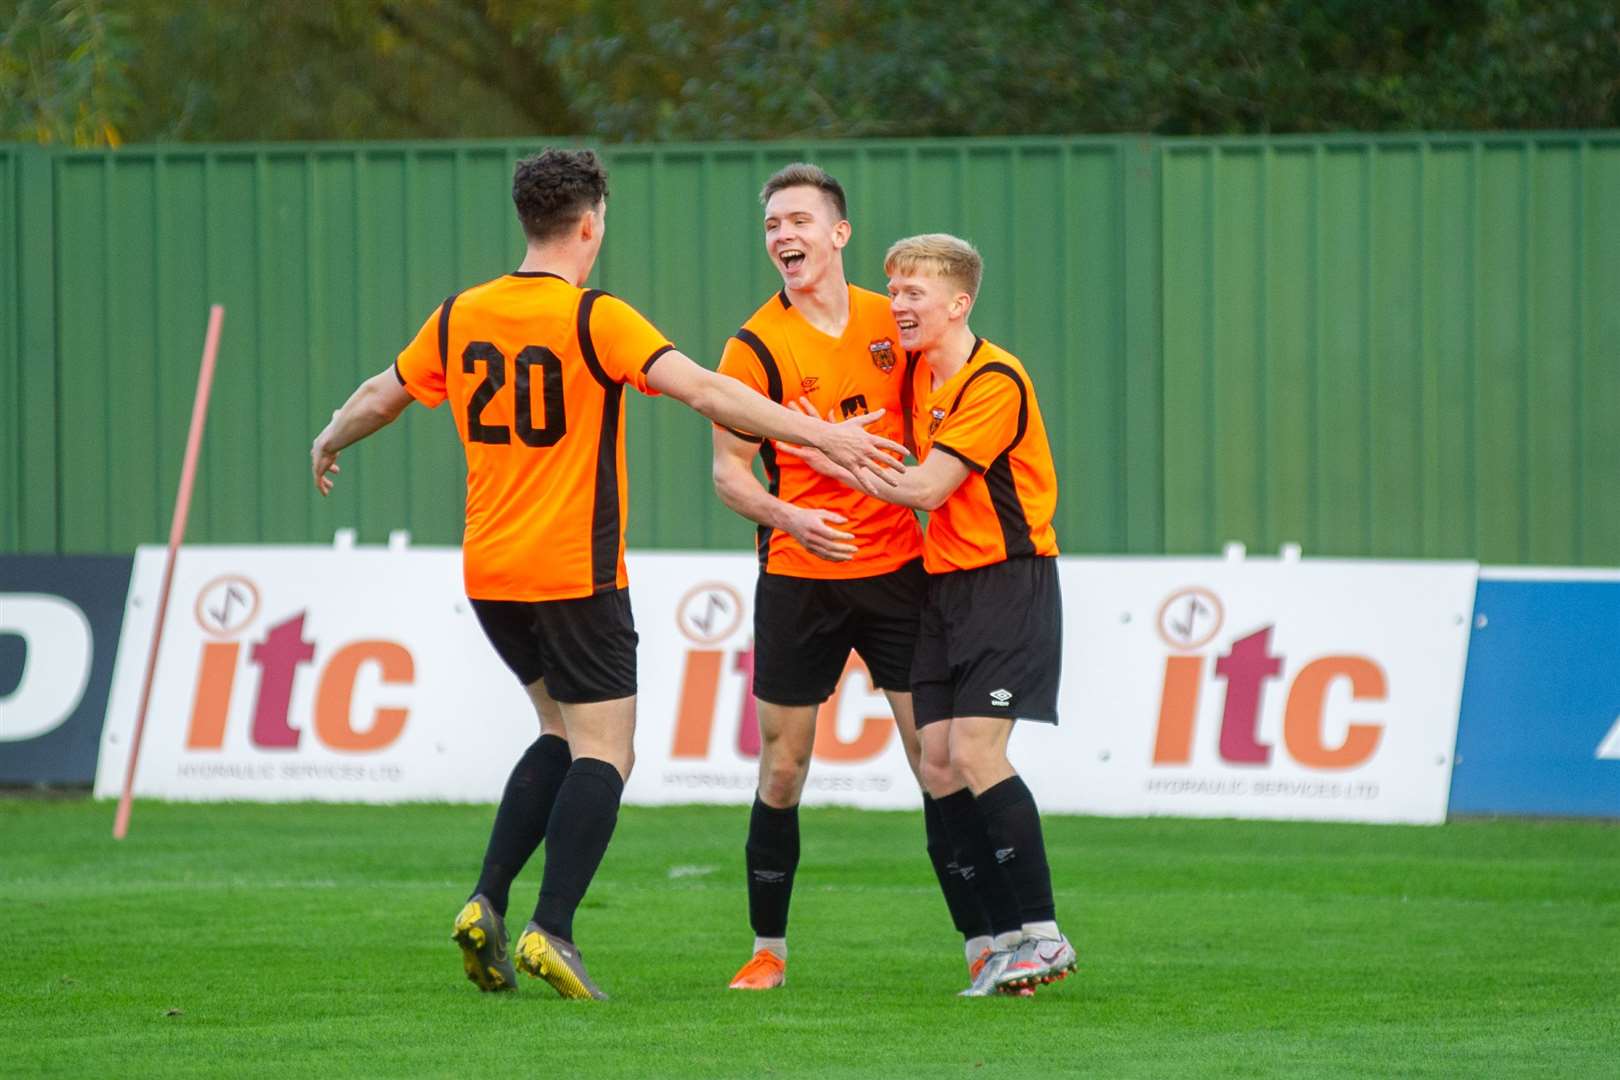 Craig Cormack celebrates scoring the winner with substitutes Jack Maley and Ross Gunn. Picture: Daniel Forsyth